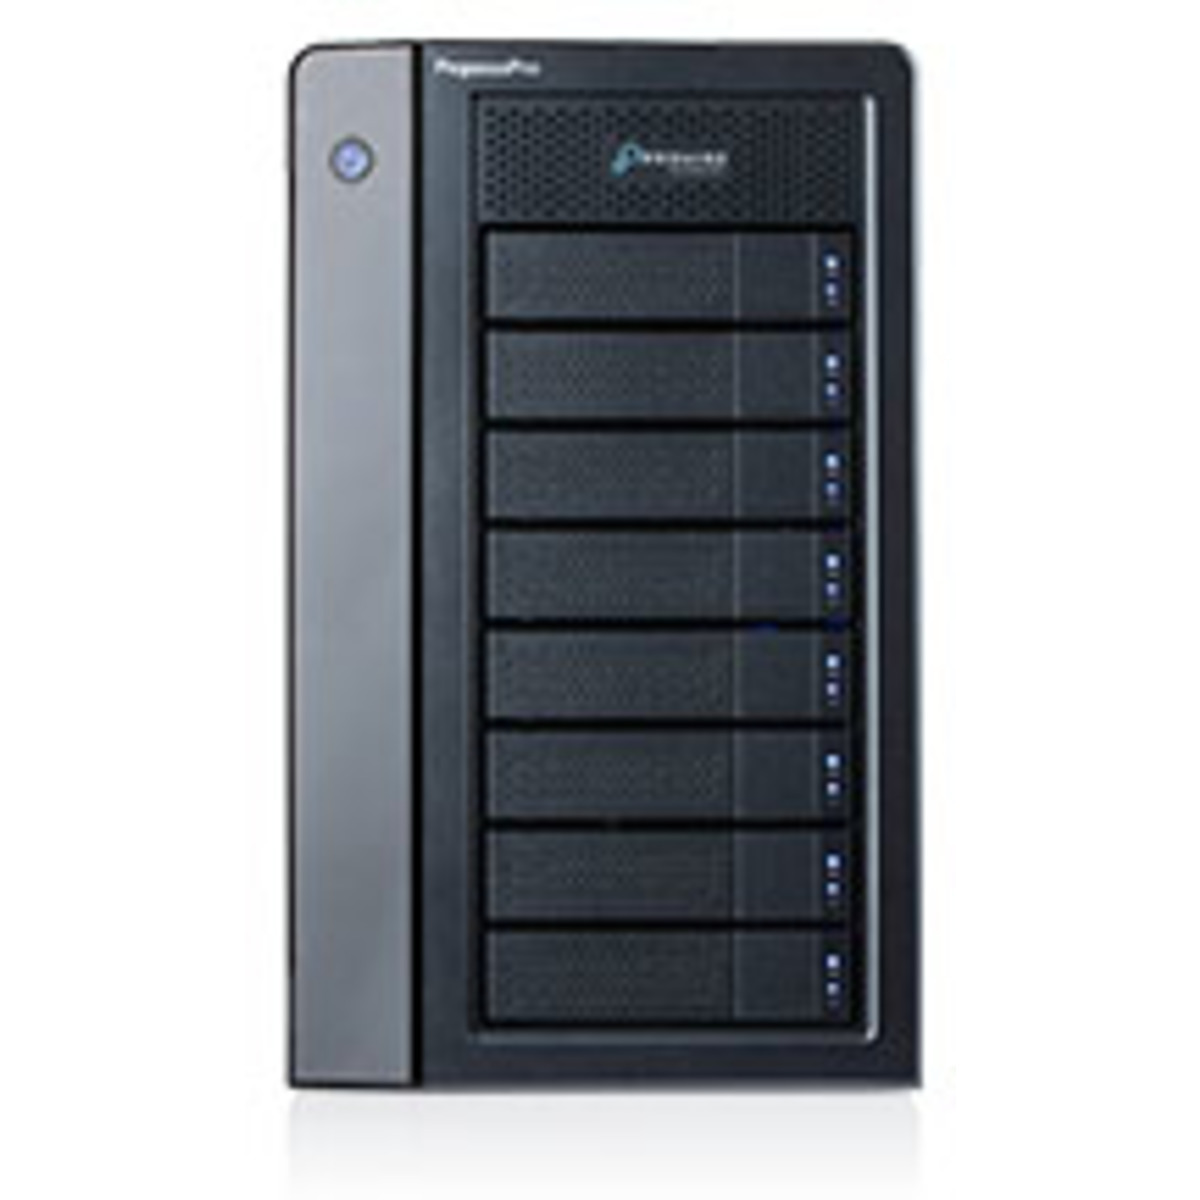 buy Promise Technology PegasusPro R8 128tb Desktop DAS-NAS - Combo Direct + Network Storage Device 8x16000gb Seagate EXOS X18 ST16000NM000J 3.5 7200rpm SATA 6Gb/s HDD ENTERPRISE Class Drives Installed - Burn-In Tested - nas headquarters buy network attached storage server device das new raid-5 free shipping simply usa PegasusPro R8